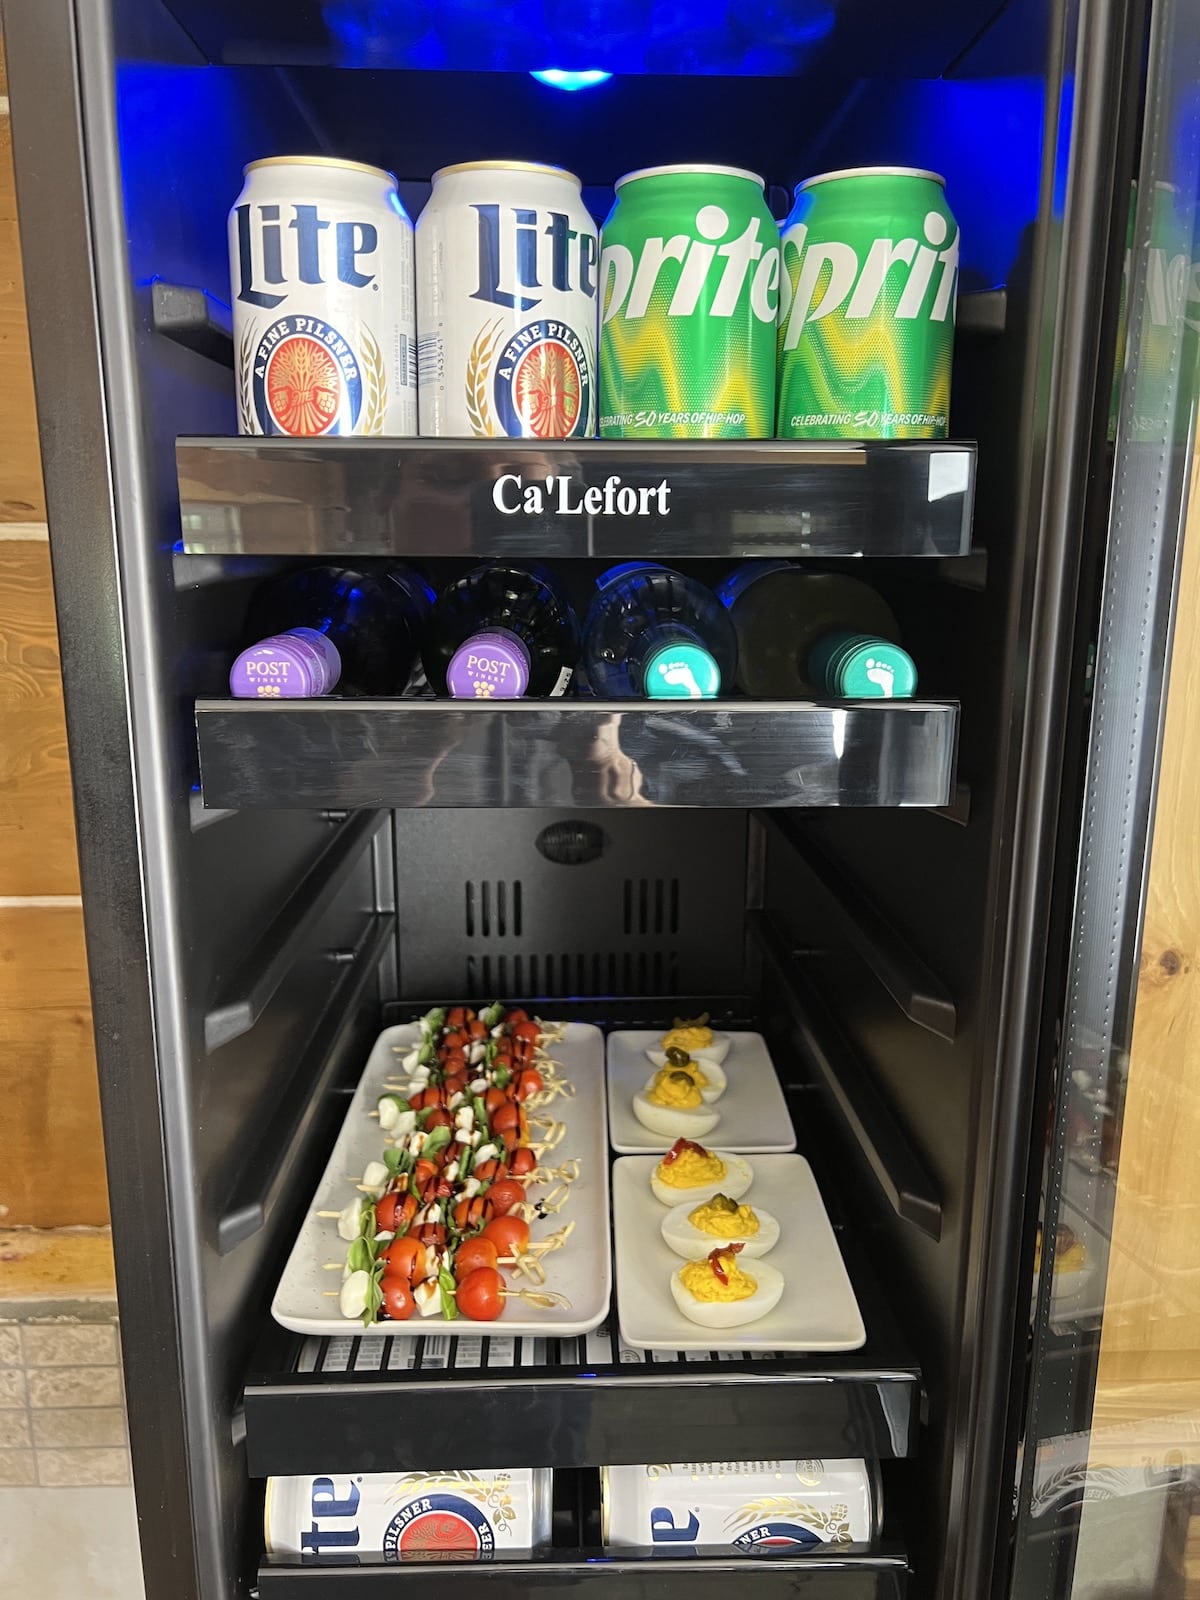 Appetizers and beer in a beverage fridge.